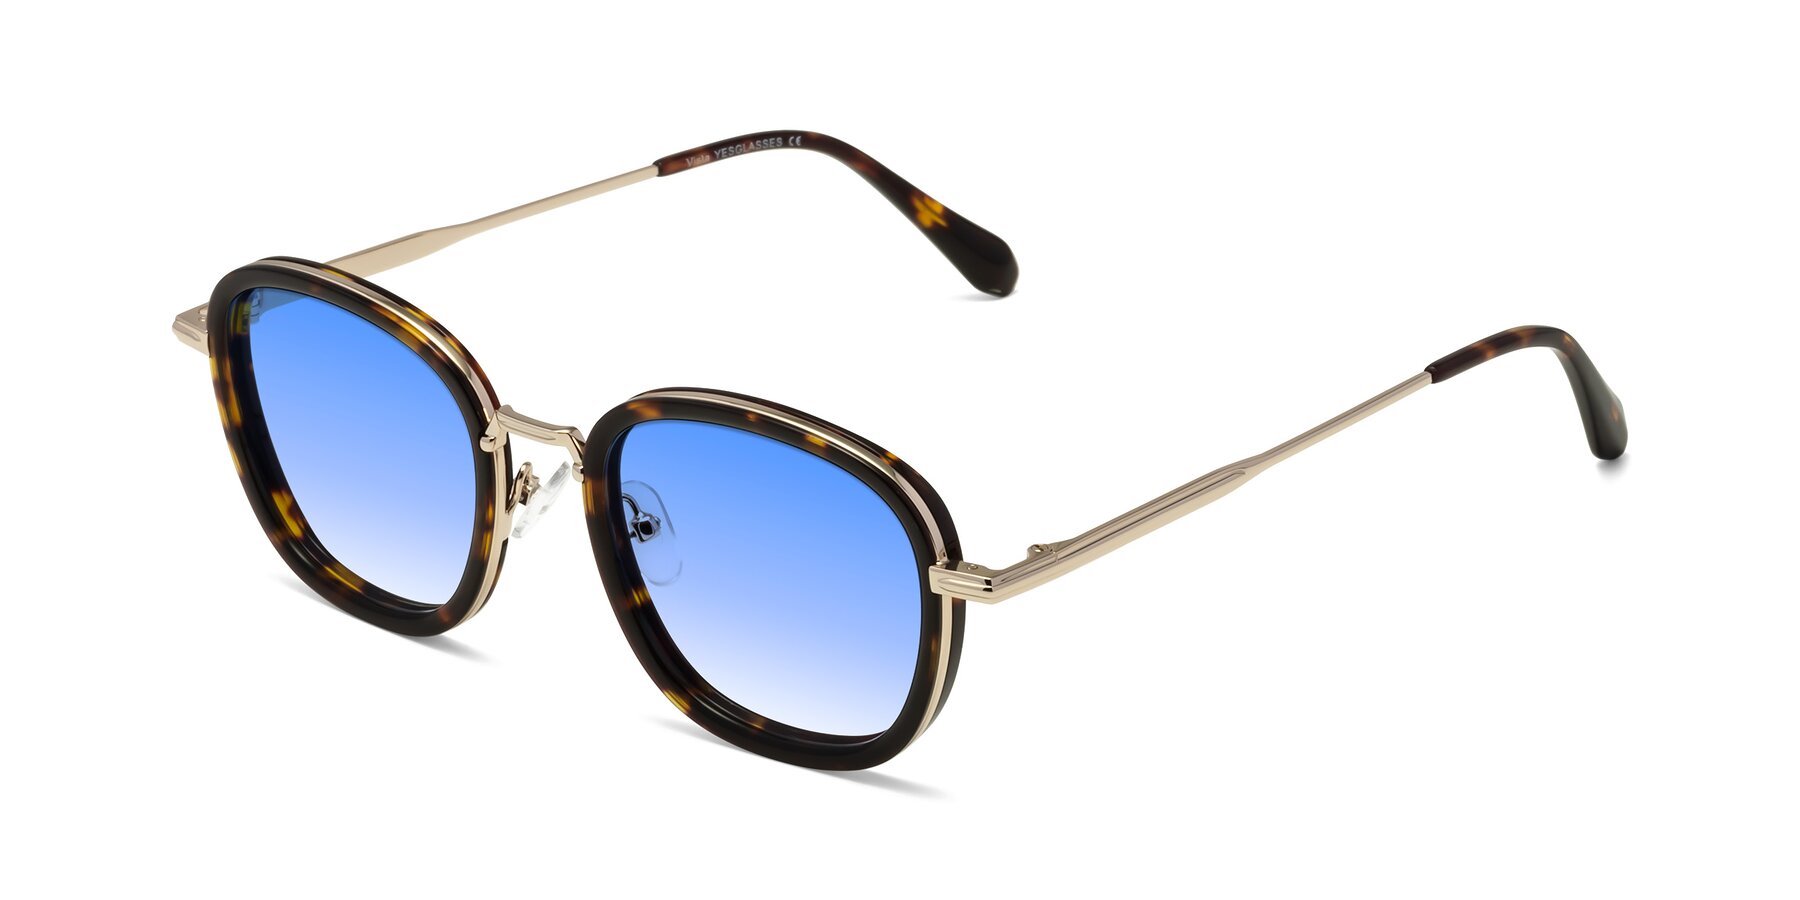 Angle of Vista in Tortoise-Light Gold with Blue Gradient Lenses